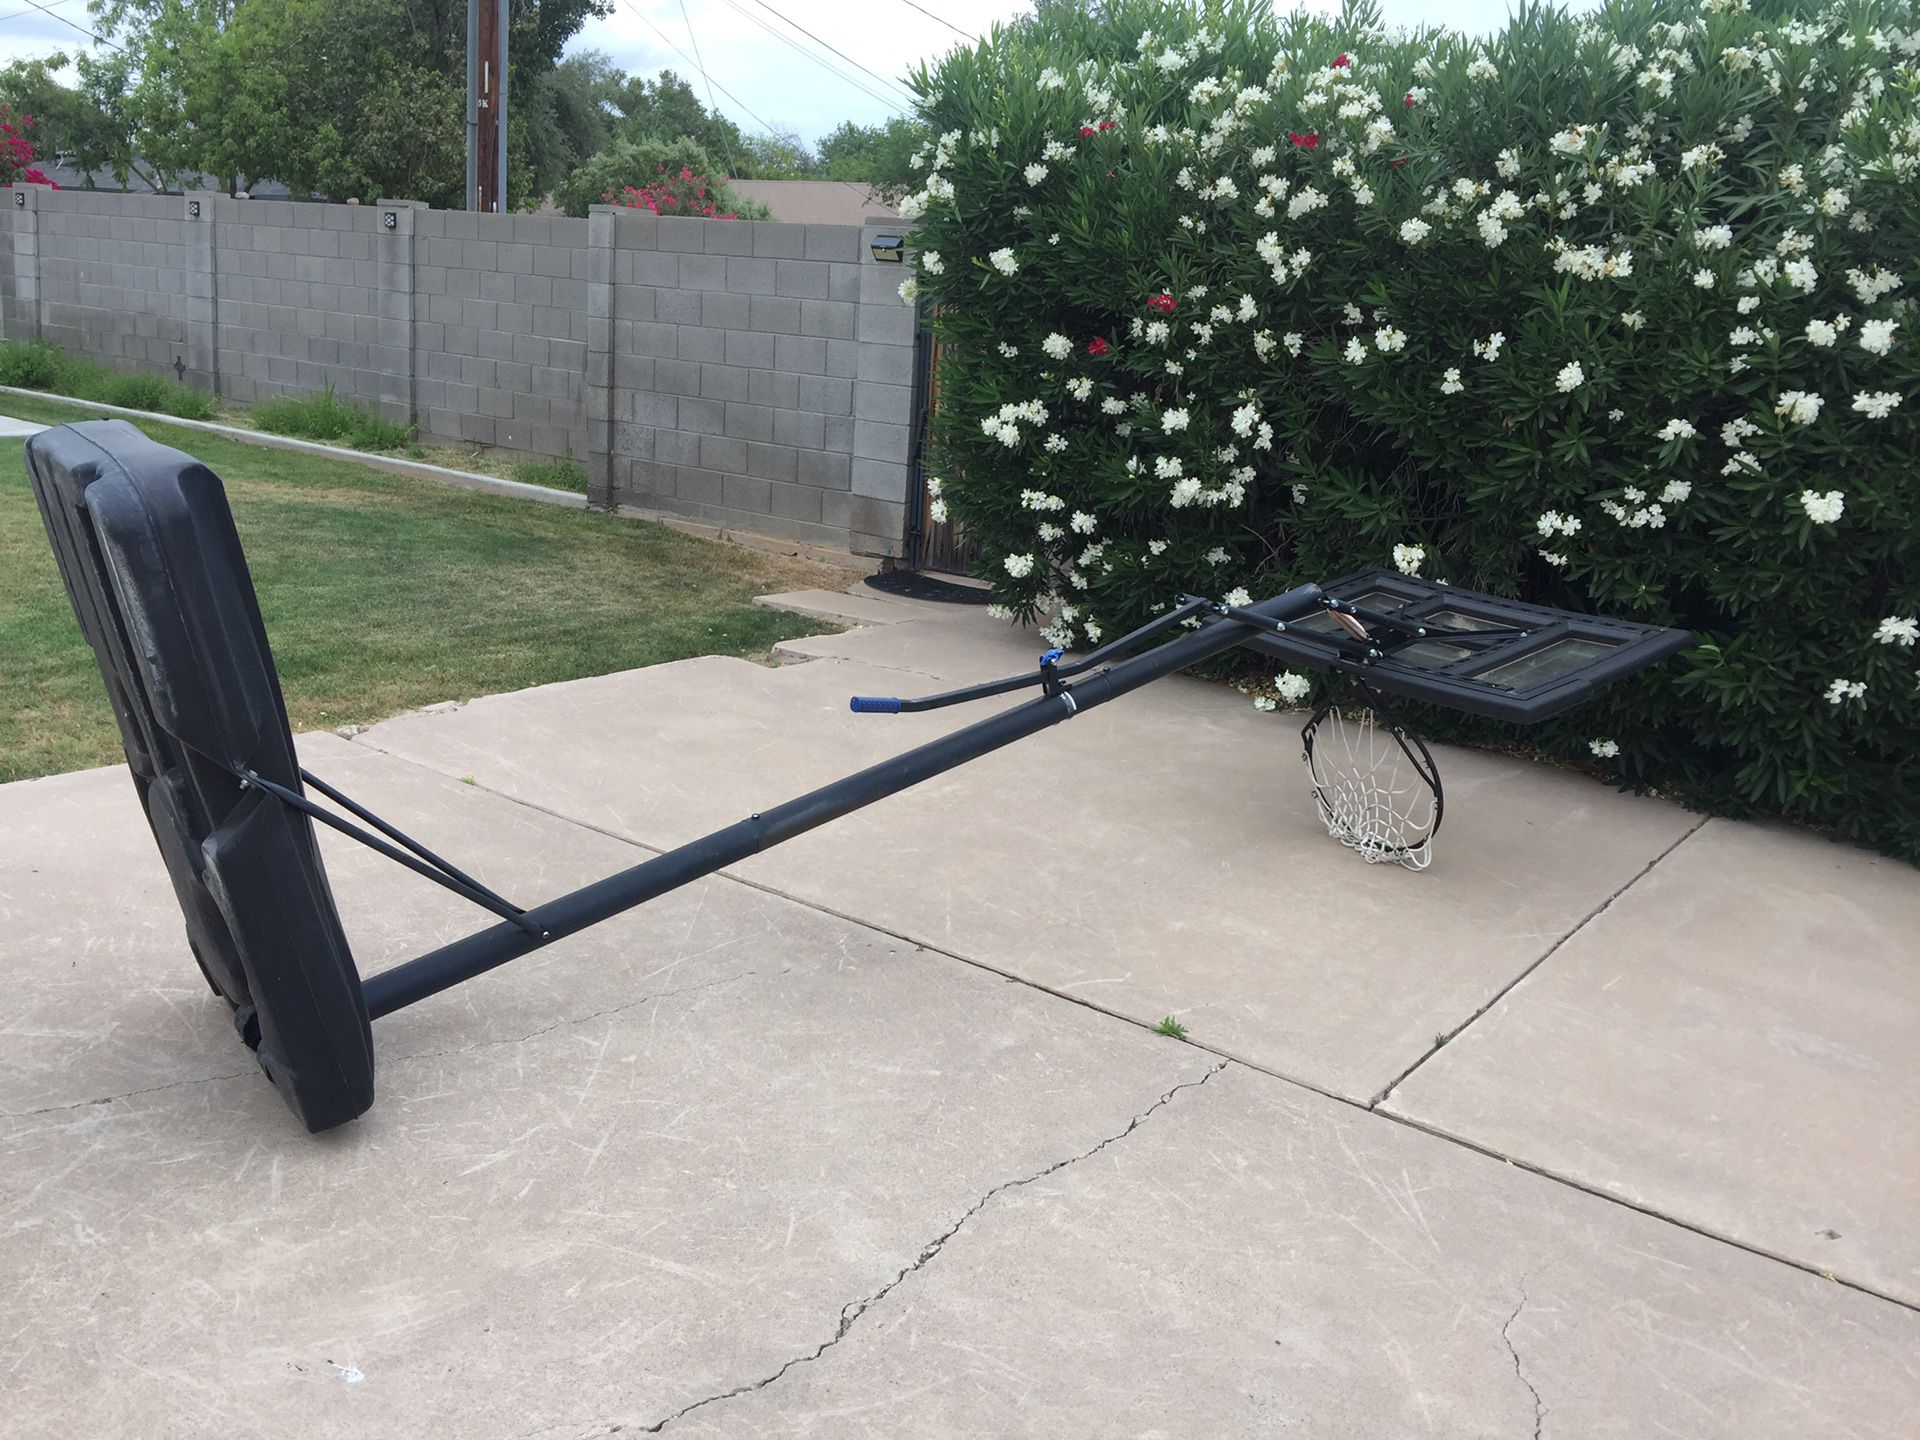 Portable basketball hoop. In great condition. Firm price $50.00. It will need to be picked up. We are in the central Phoenix area.